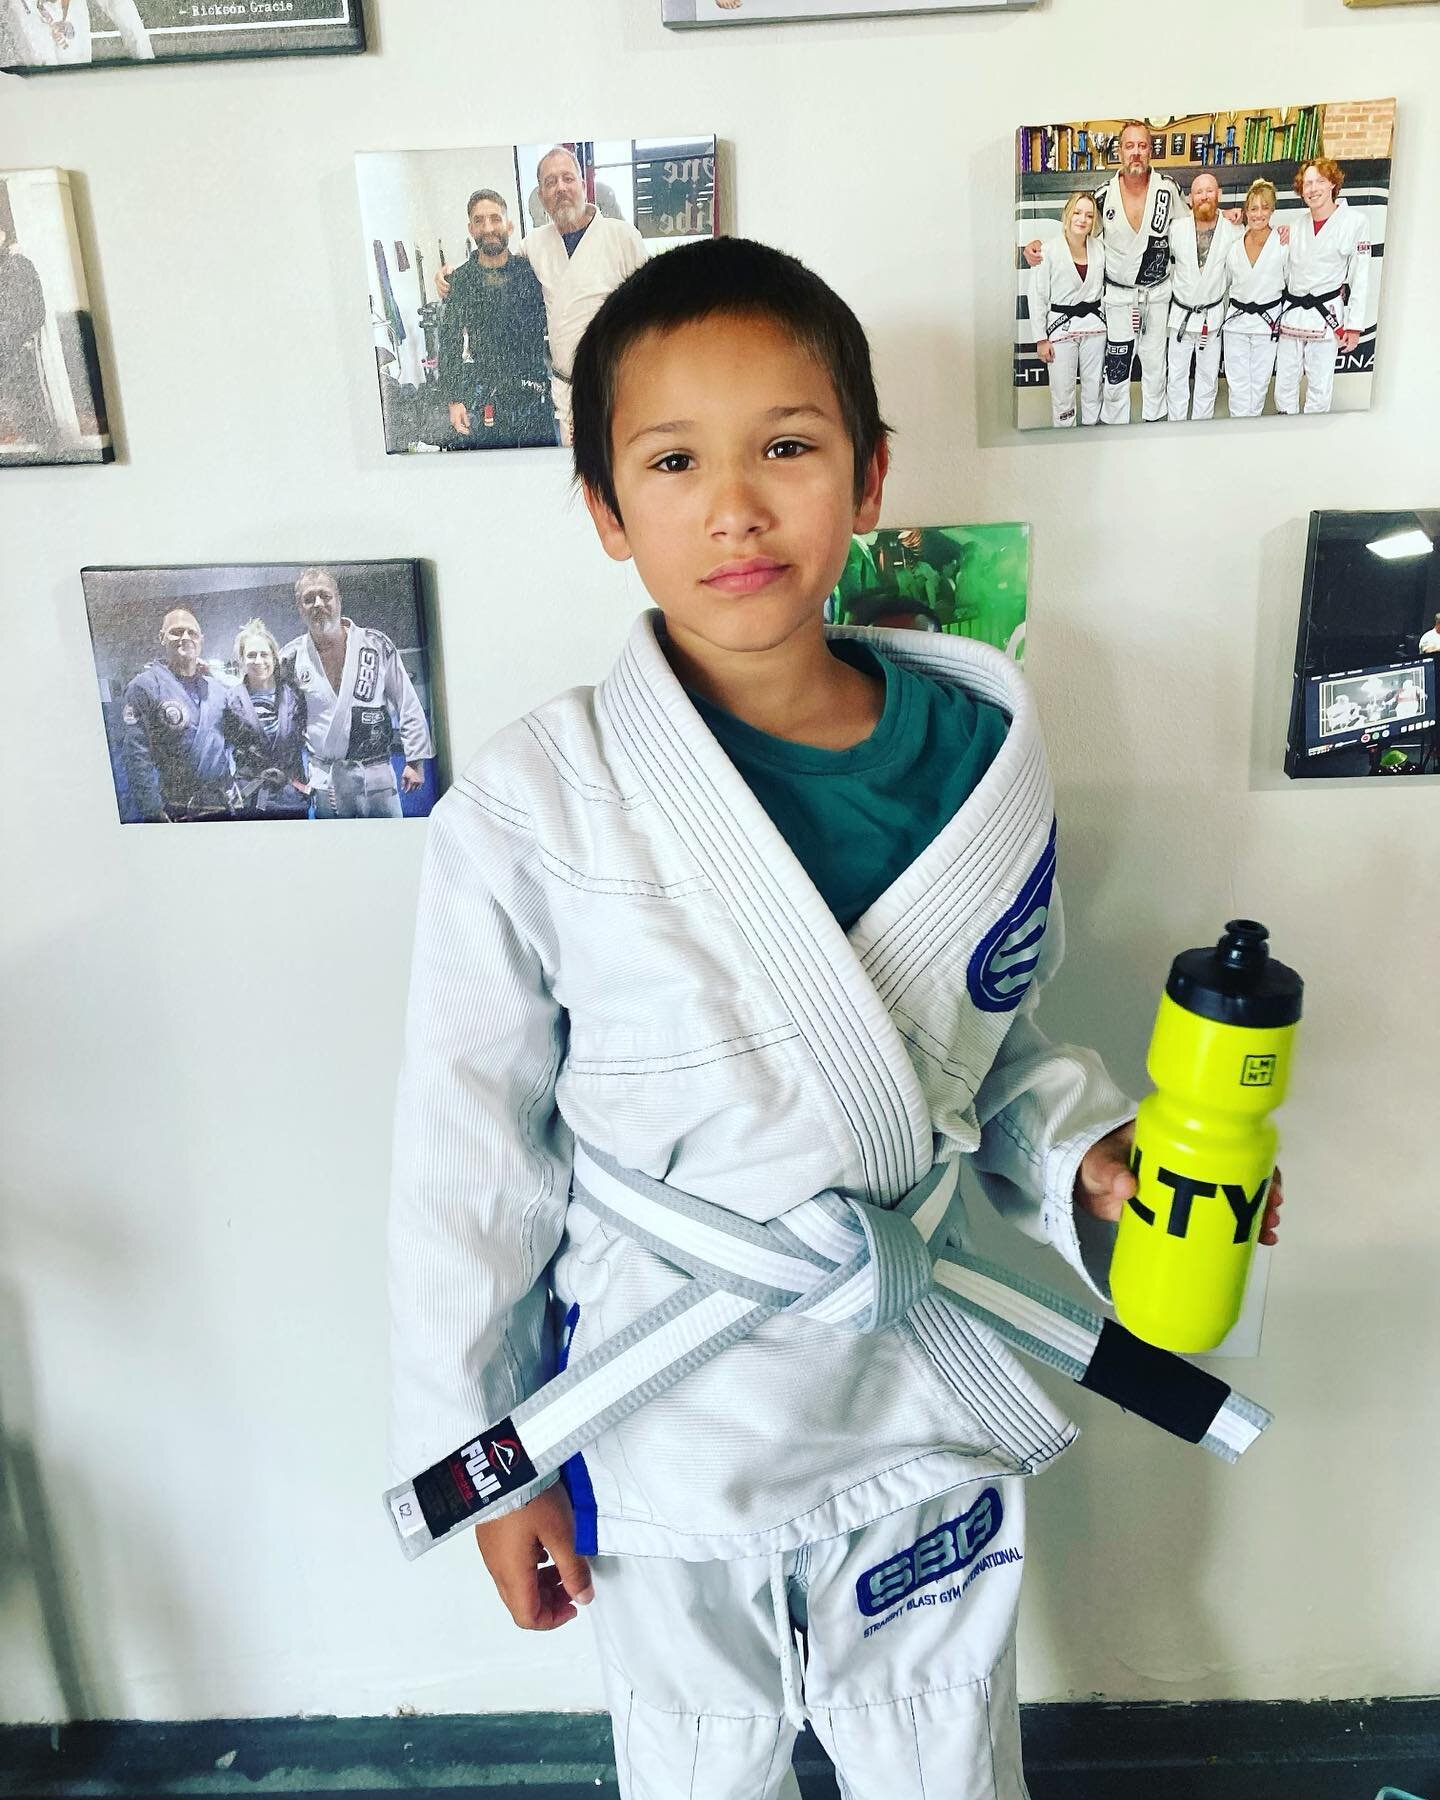 With consistent attendance, increasing knowledge in their Jiu Jitsu and showing themselves to be a good training partner; kids in our growing gorillas program gradually climb the ladder of belt rank.

Milo has been training @sbgportland kids program 